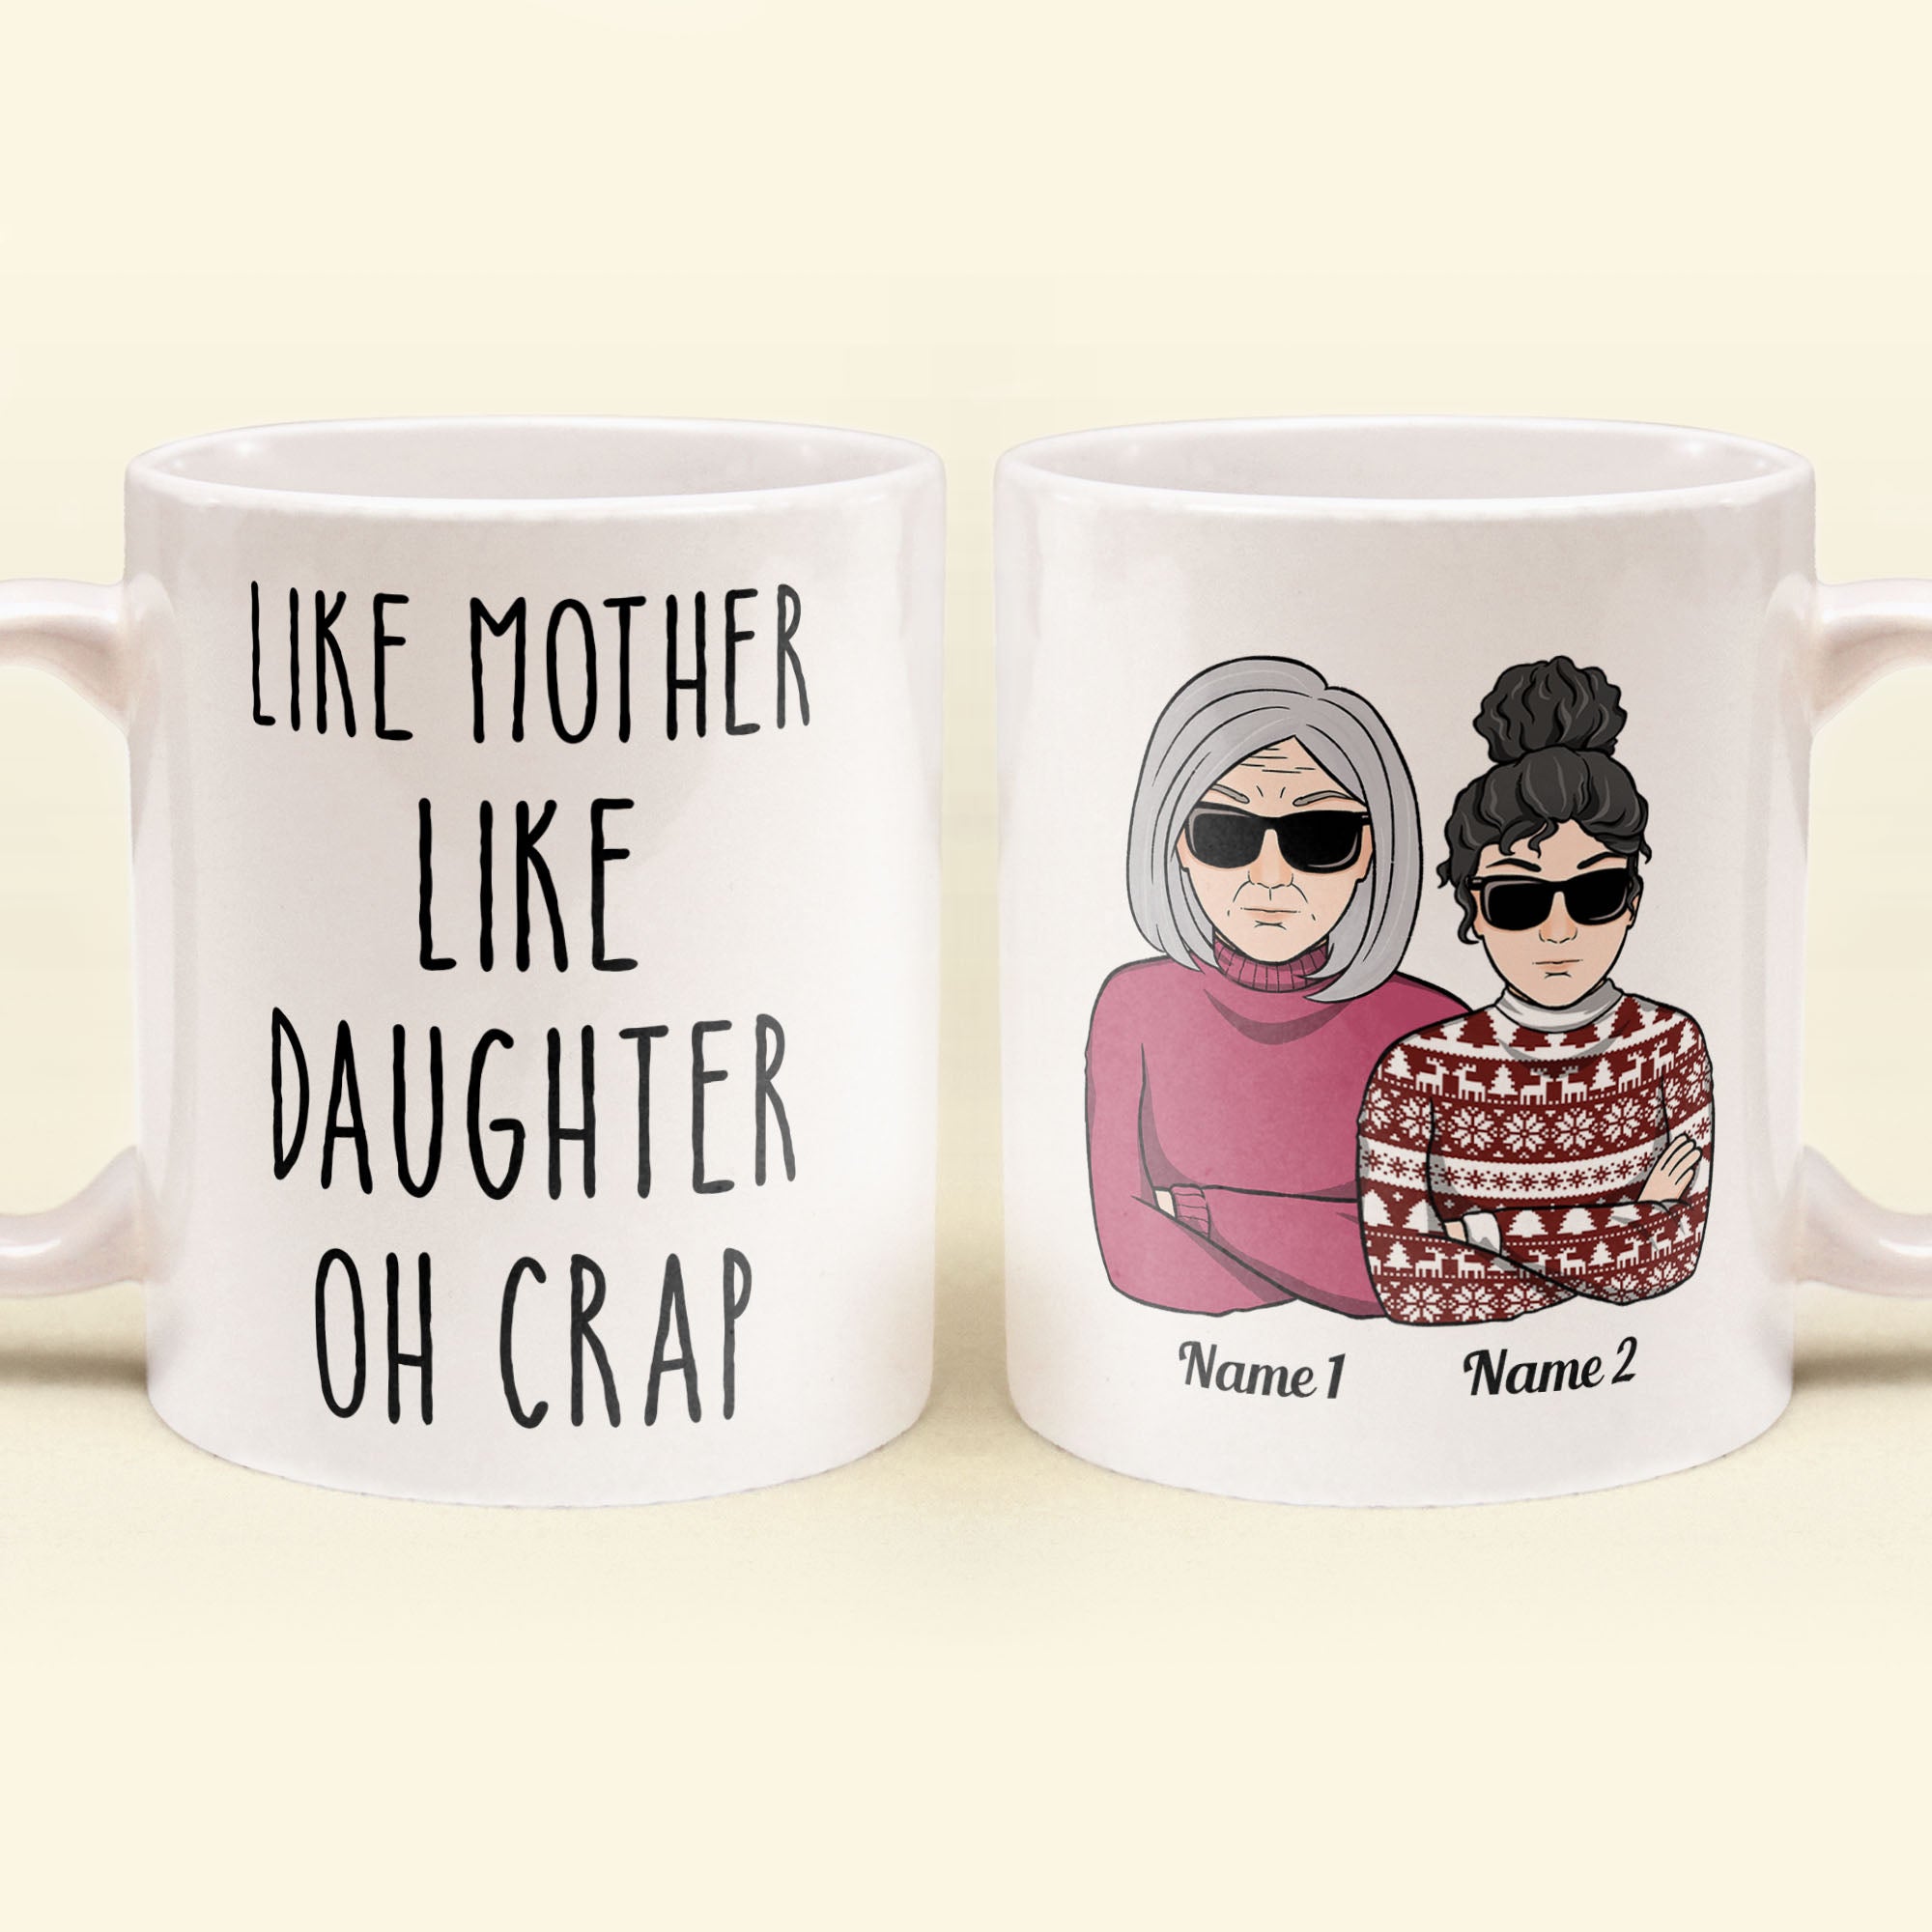 Mother and Daughter Mug - Like mother like daughter oh crap